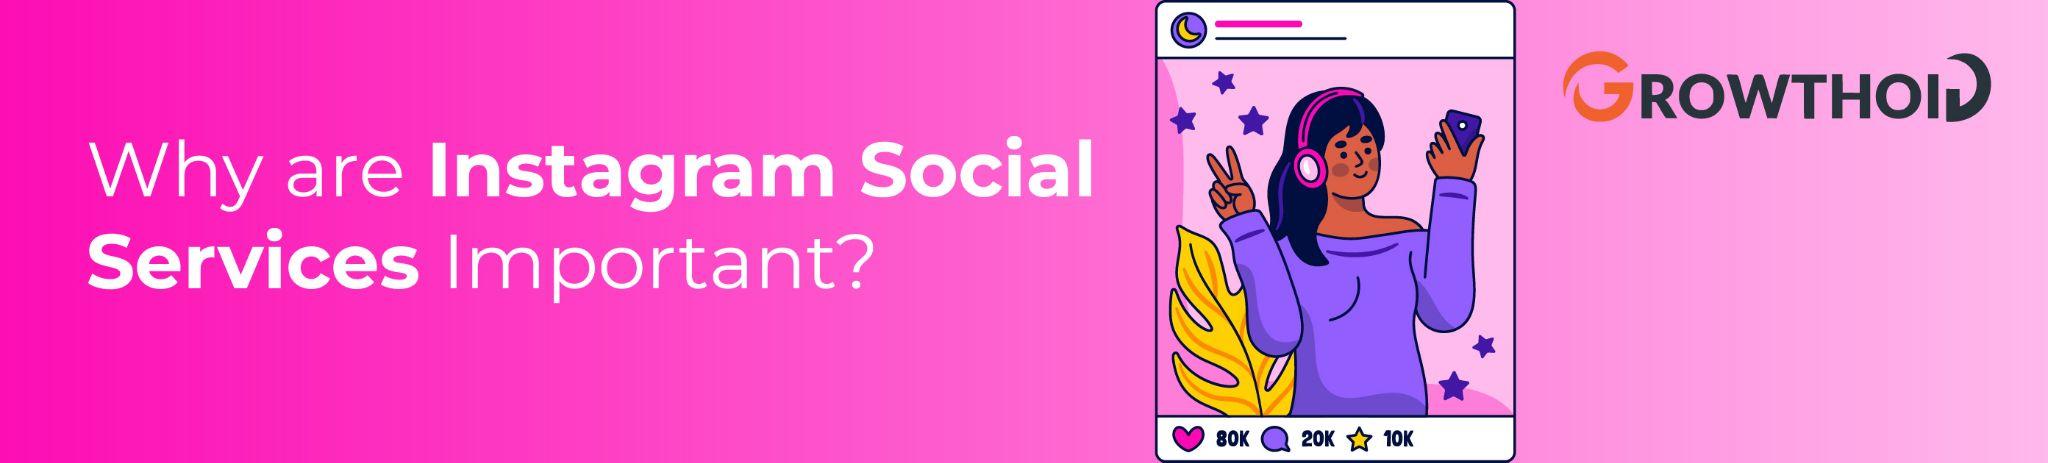 Why are Instagram Social Services Important?